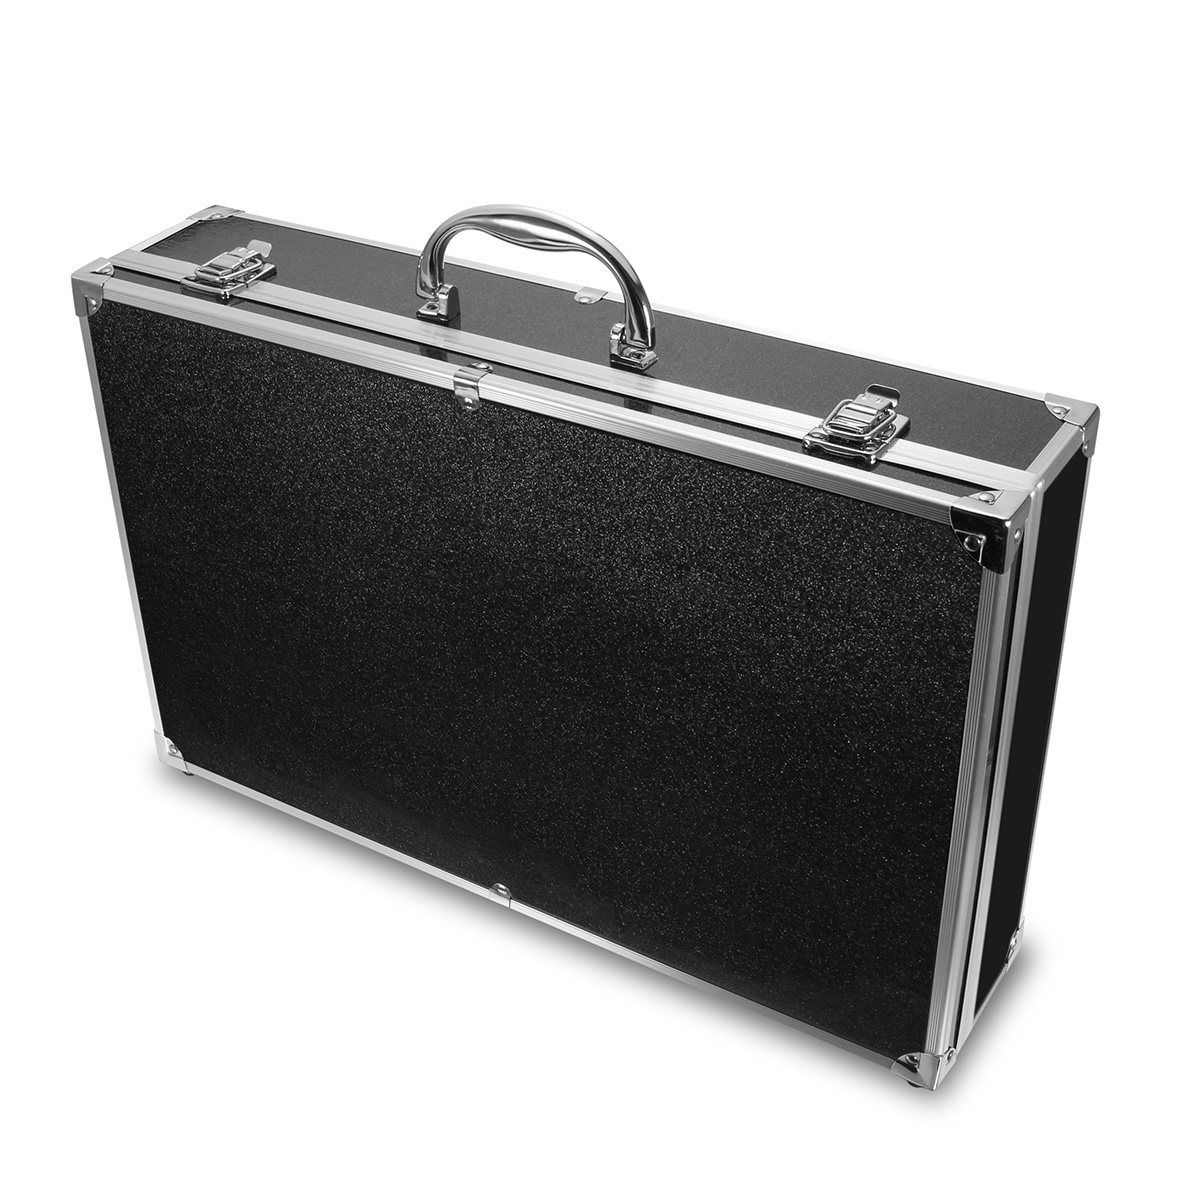 

Waterproof Aluminum Case Handy Bag Carry Box For Hubsan X4 H501S FPV Quadcopter Carrying Case